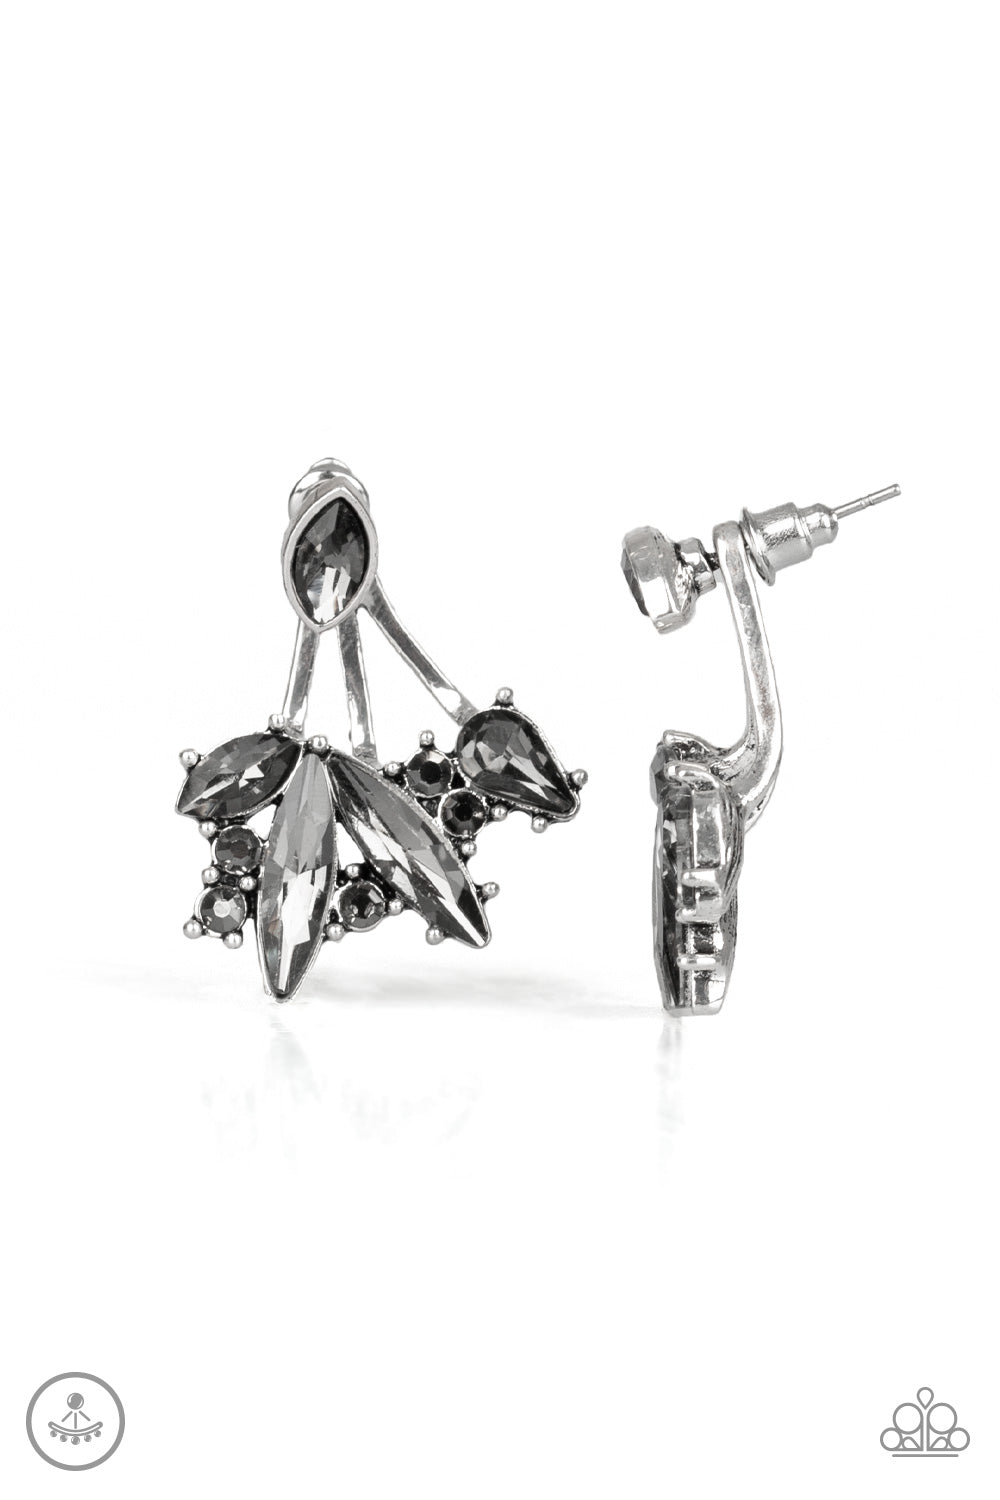 A solitaire smoky marquise cut rhinestone attaches to a double-sided post, designed to fasten behind the ear. Encrusted in a collision of mismatched smoky and hematite rhinestones, a double-sided post peeks out beneath the ear, creating a glittery fringe. Earring attaches to a standard post fitting.